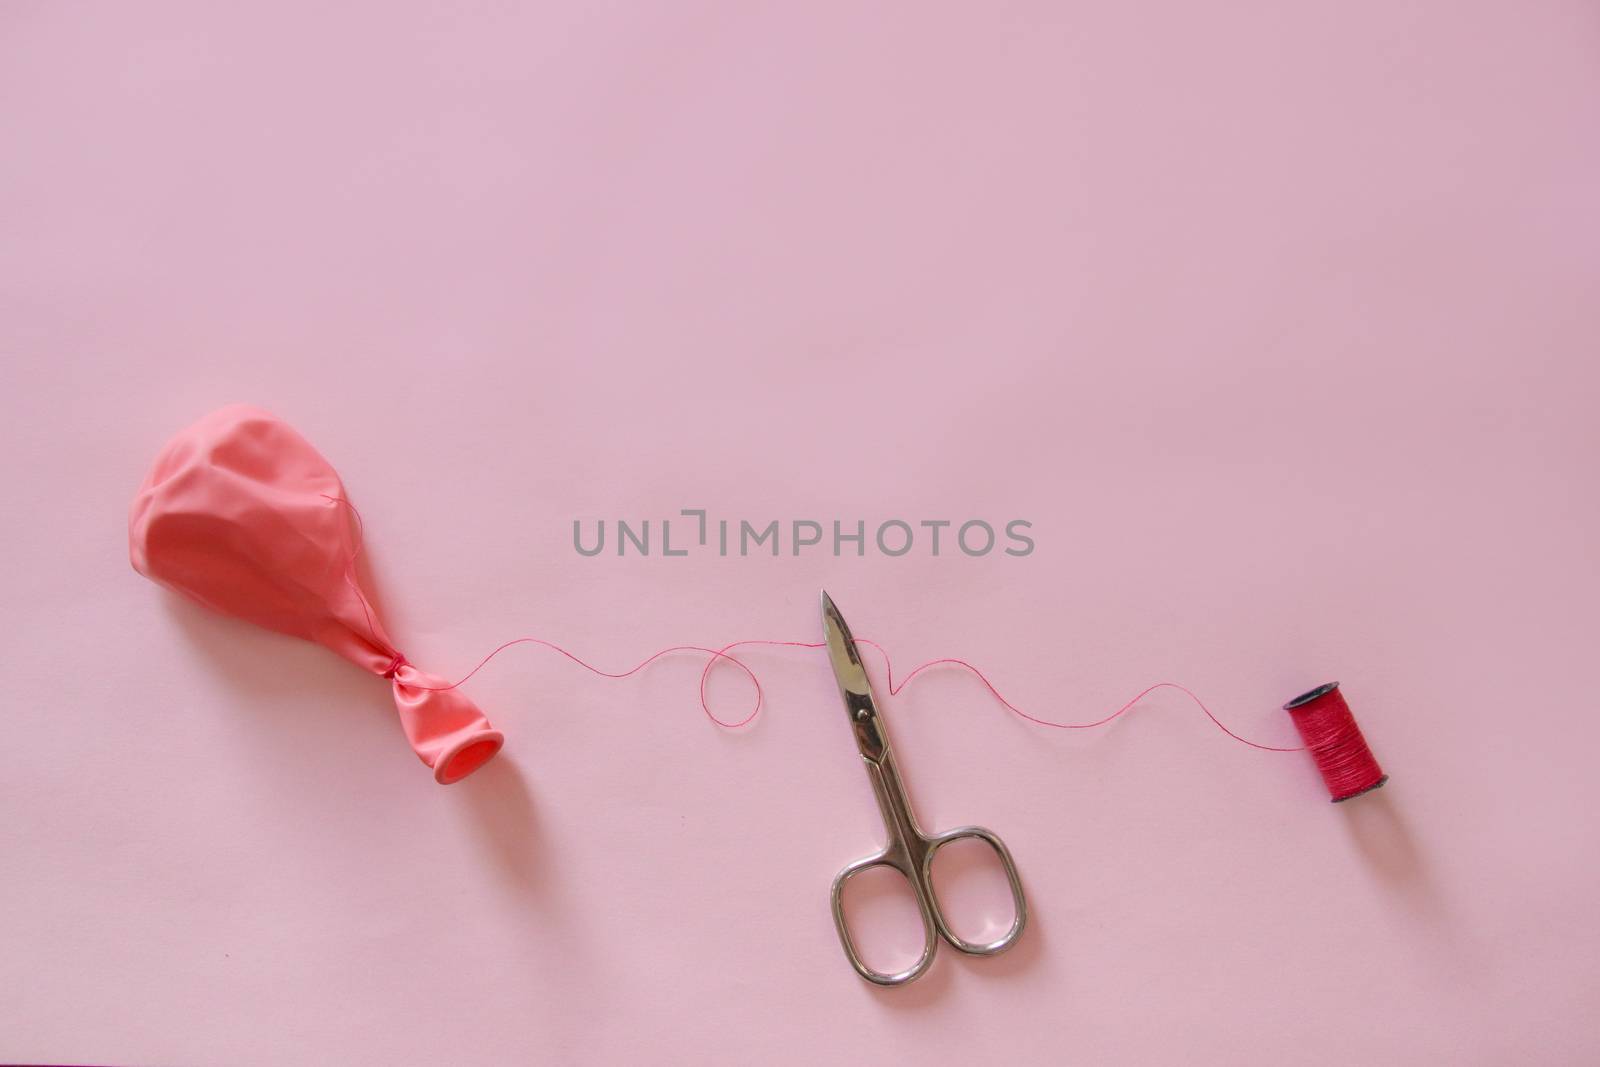 Plastic Balloon and Scissors by Sonnet15